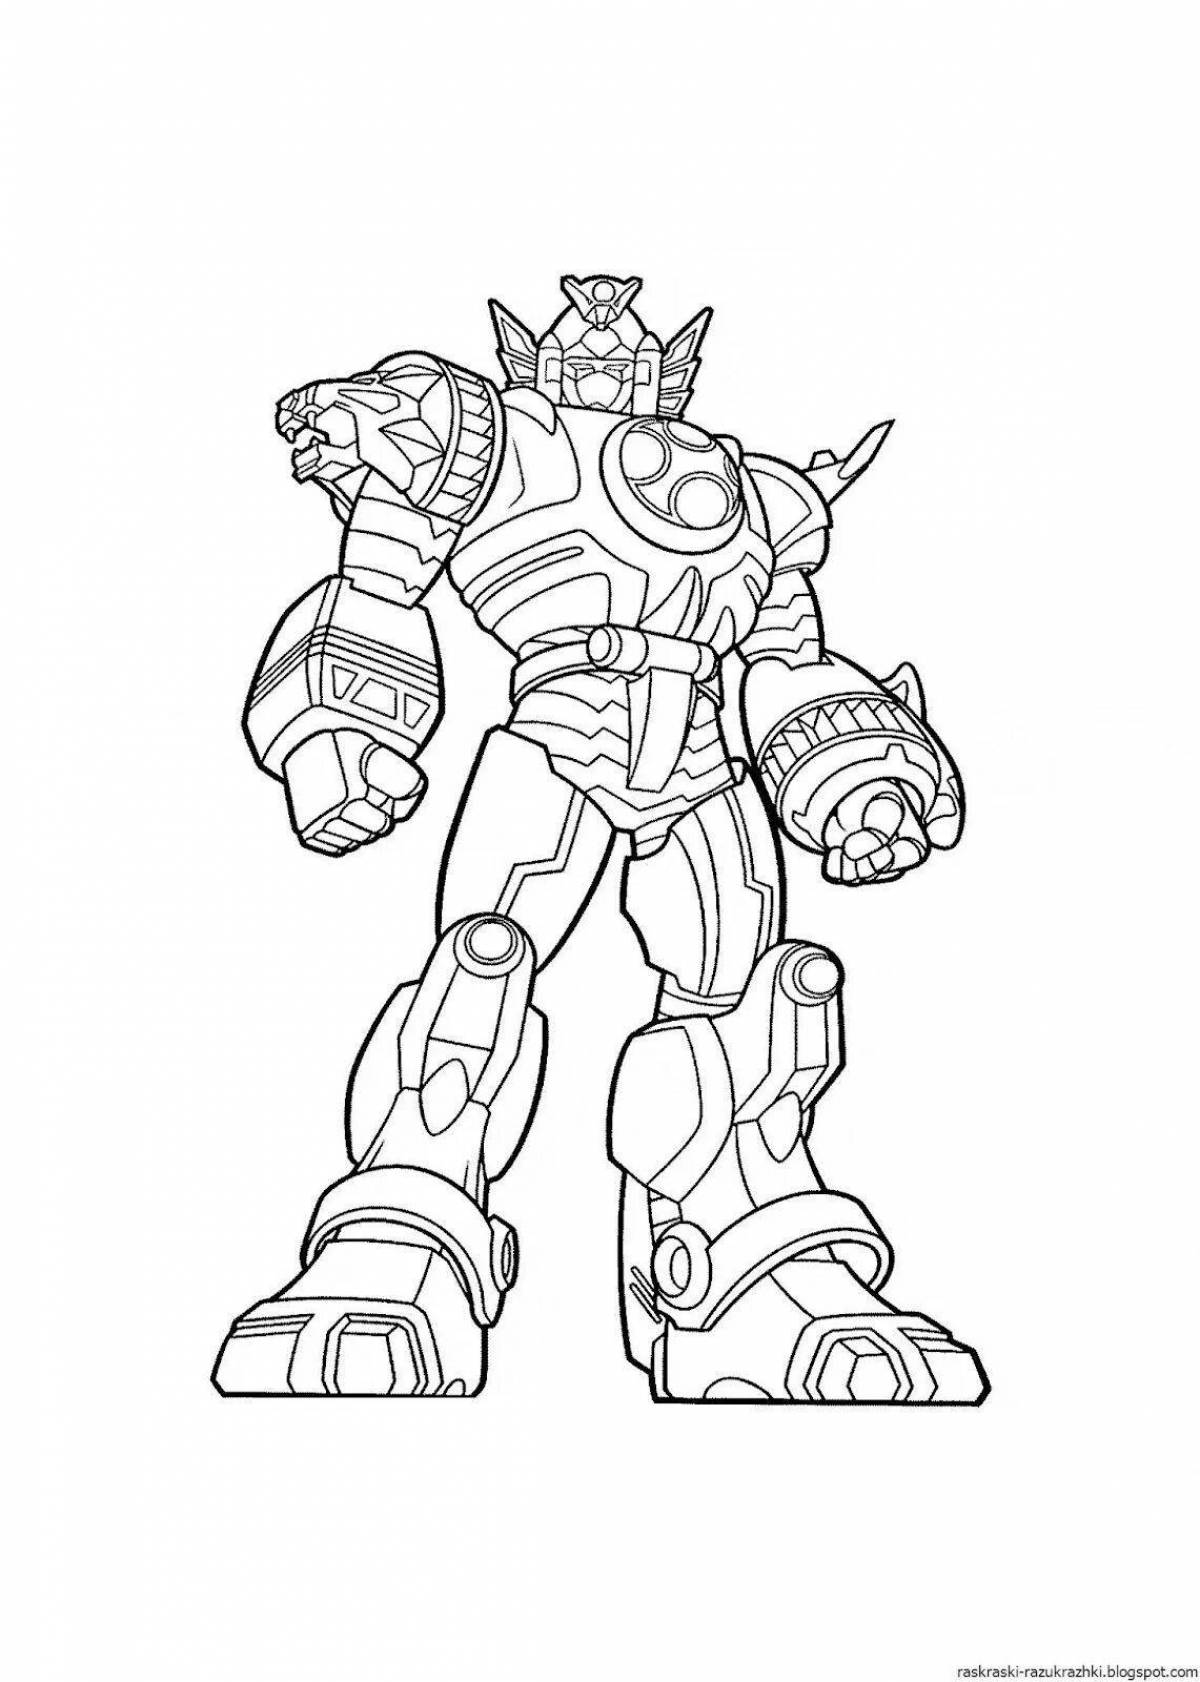 Glitter Transformer Robot Coloring Pages for Boys